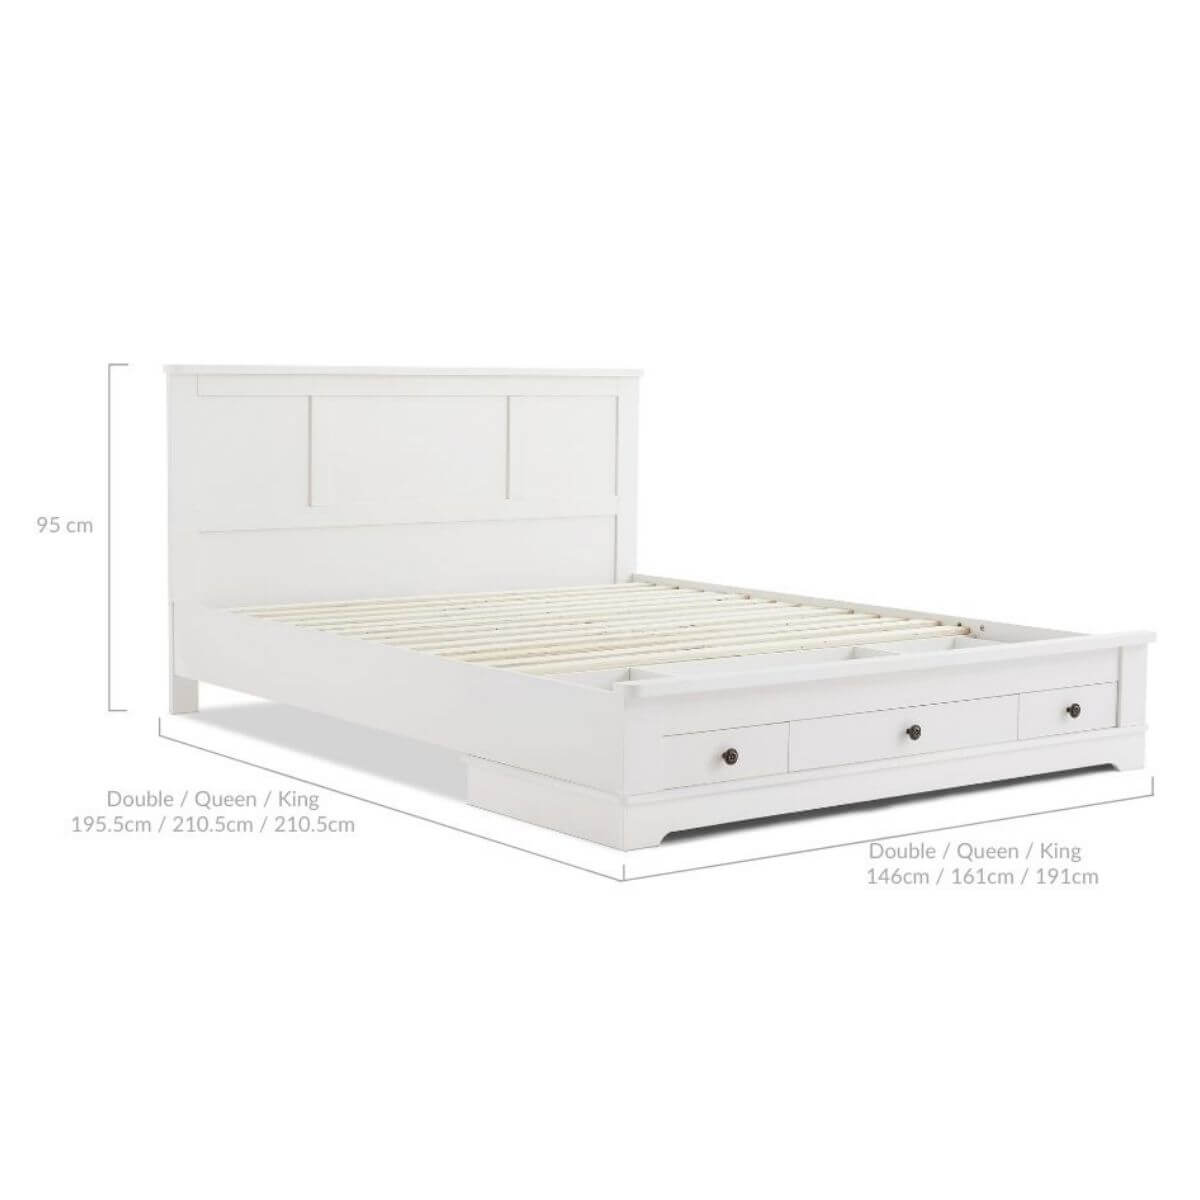 Margaux White Coastal Lifestyle Bedframe with Storage Drawers Queen-Upinteriors